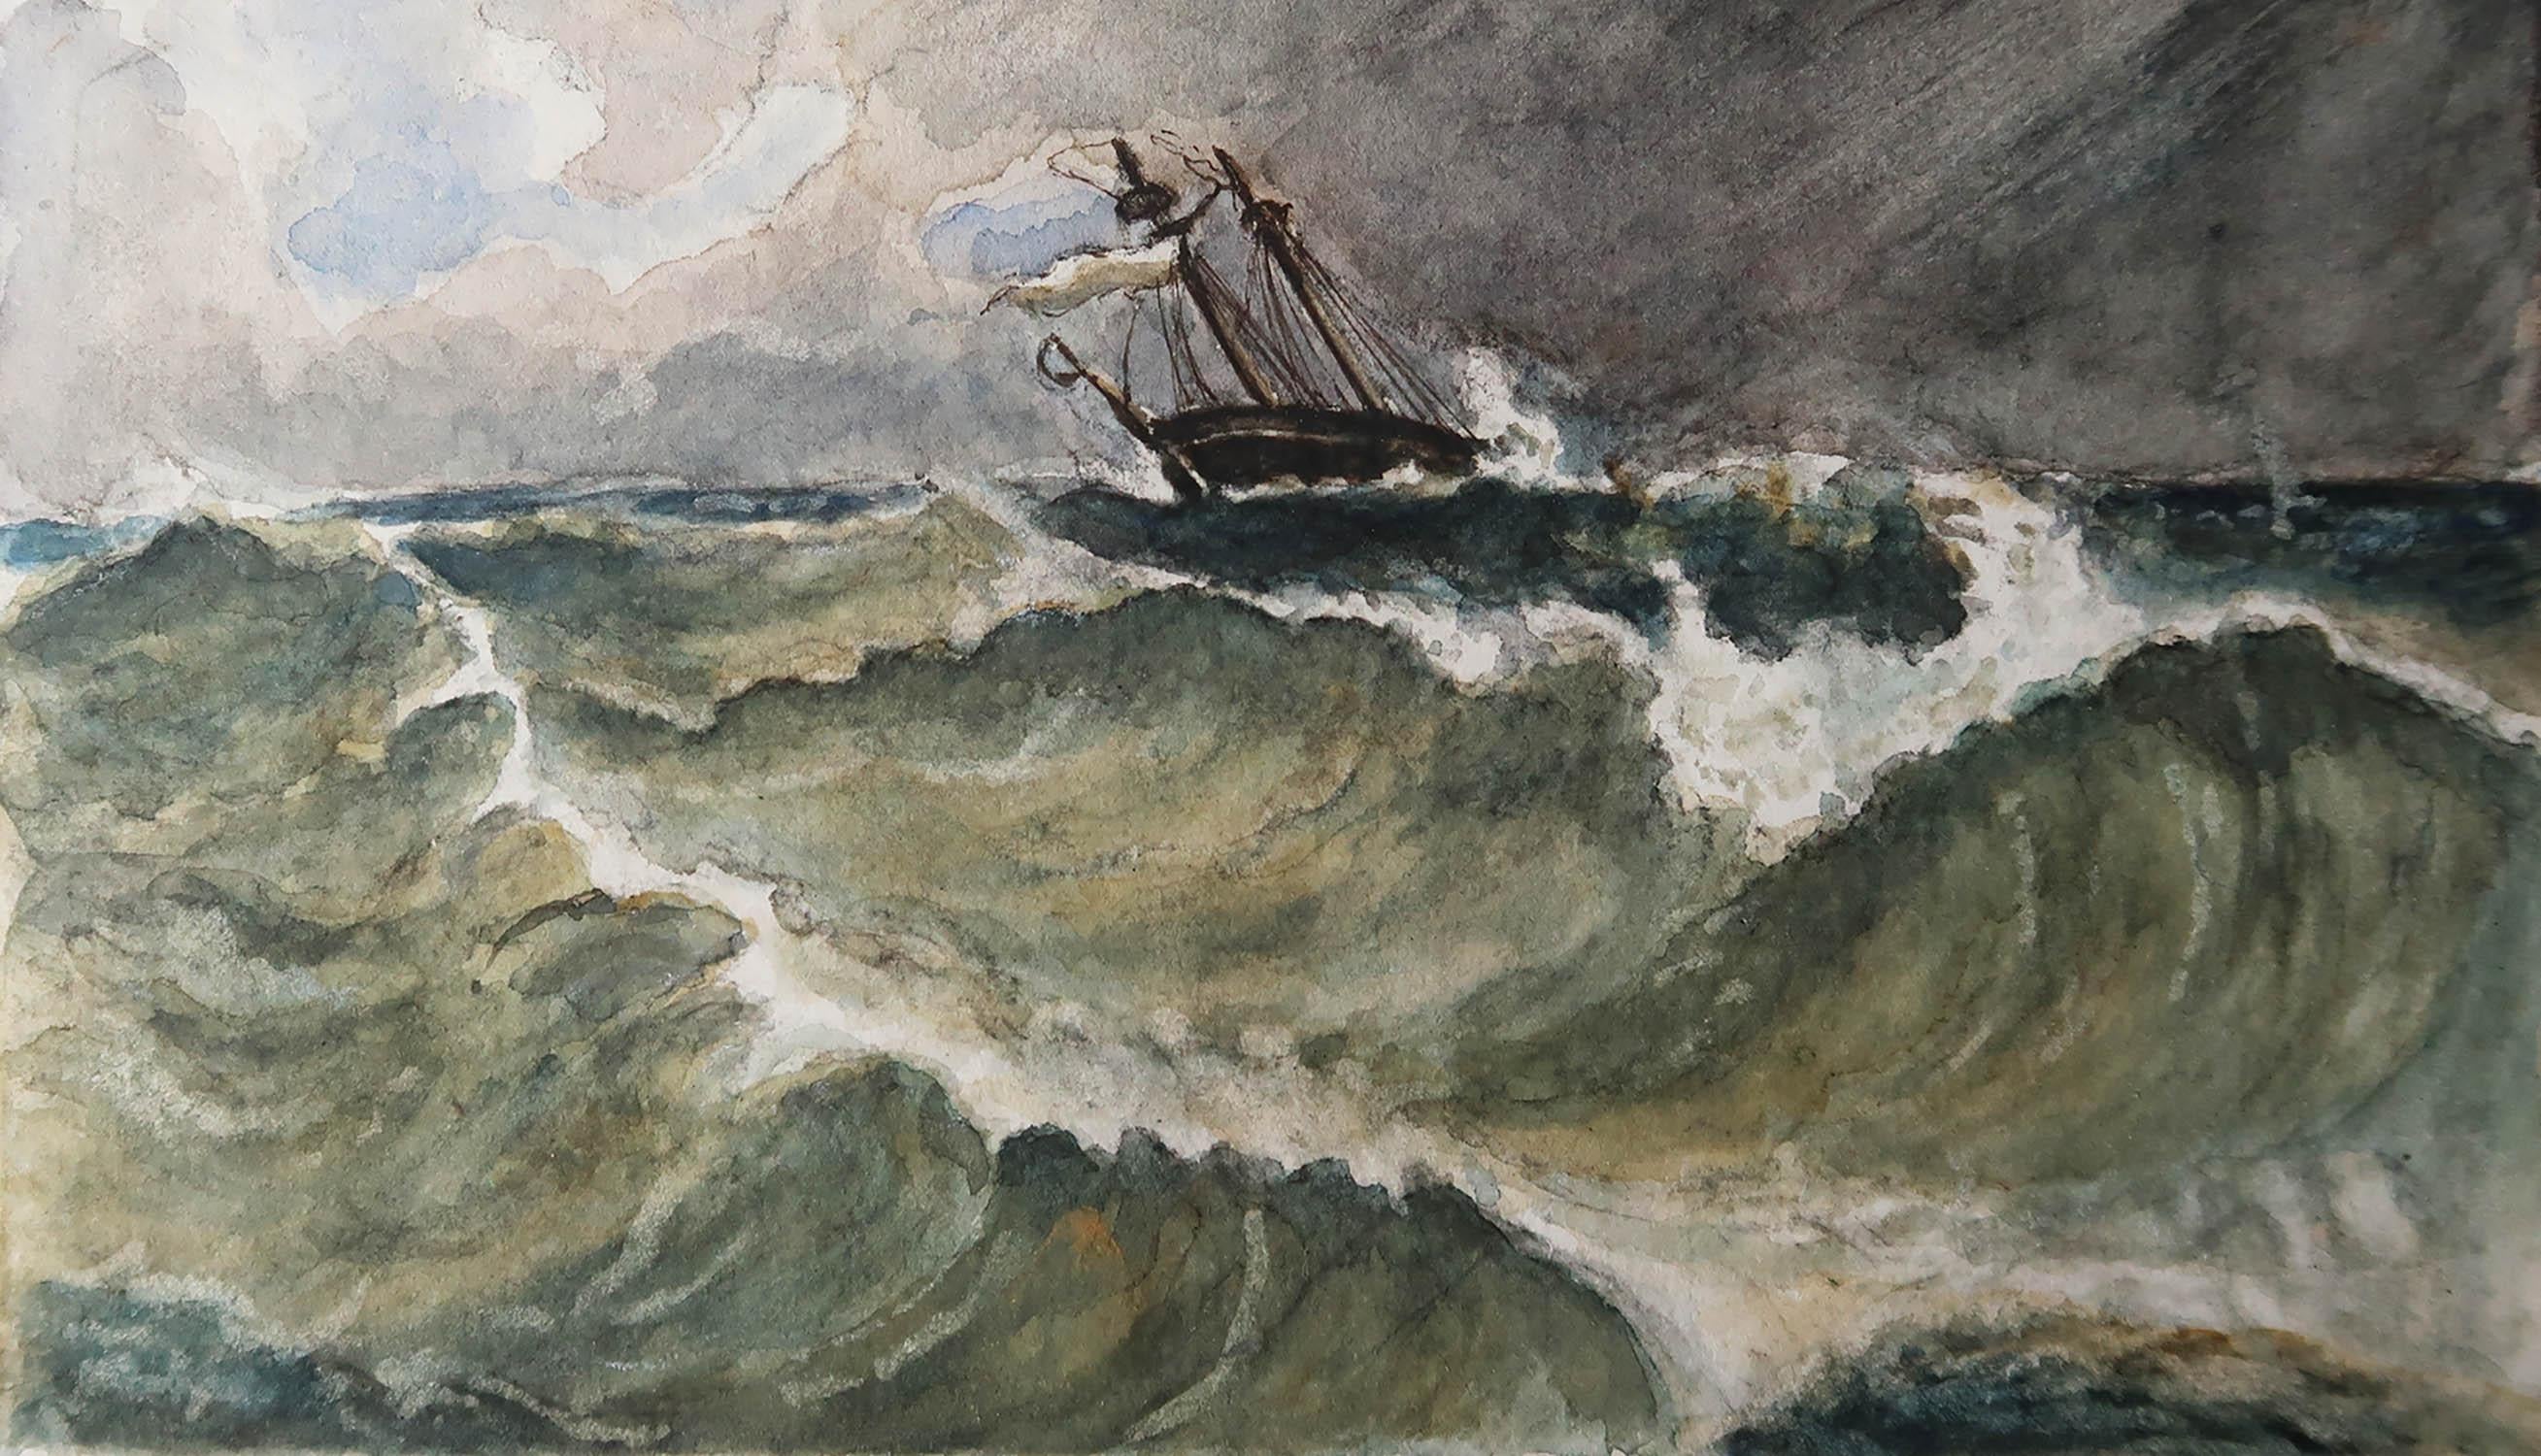 A great watercolor of a ship in a stormy sea

By Edwin Landseer Grundy*. Provenance- From an album of drawings by the artist

On paper applied to paper

Unsigned. 

The measurement relates to the actual painted part and not the